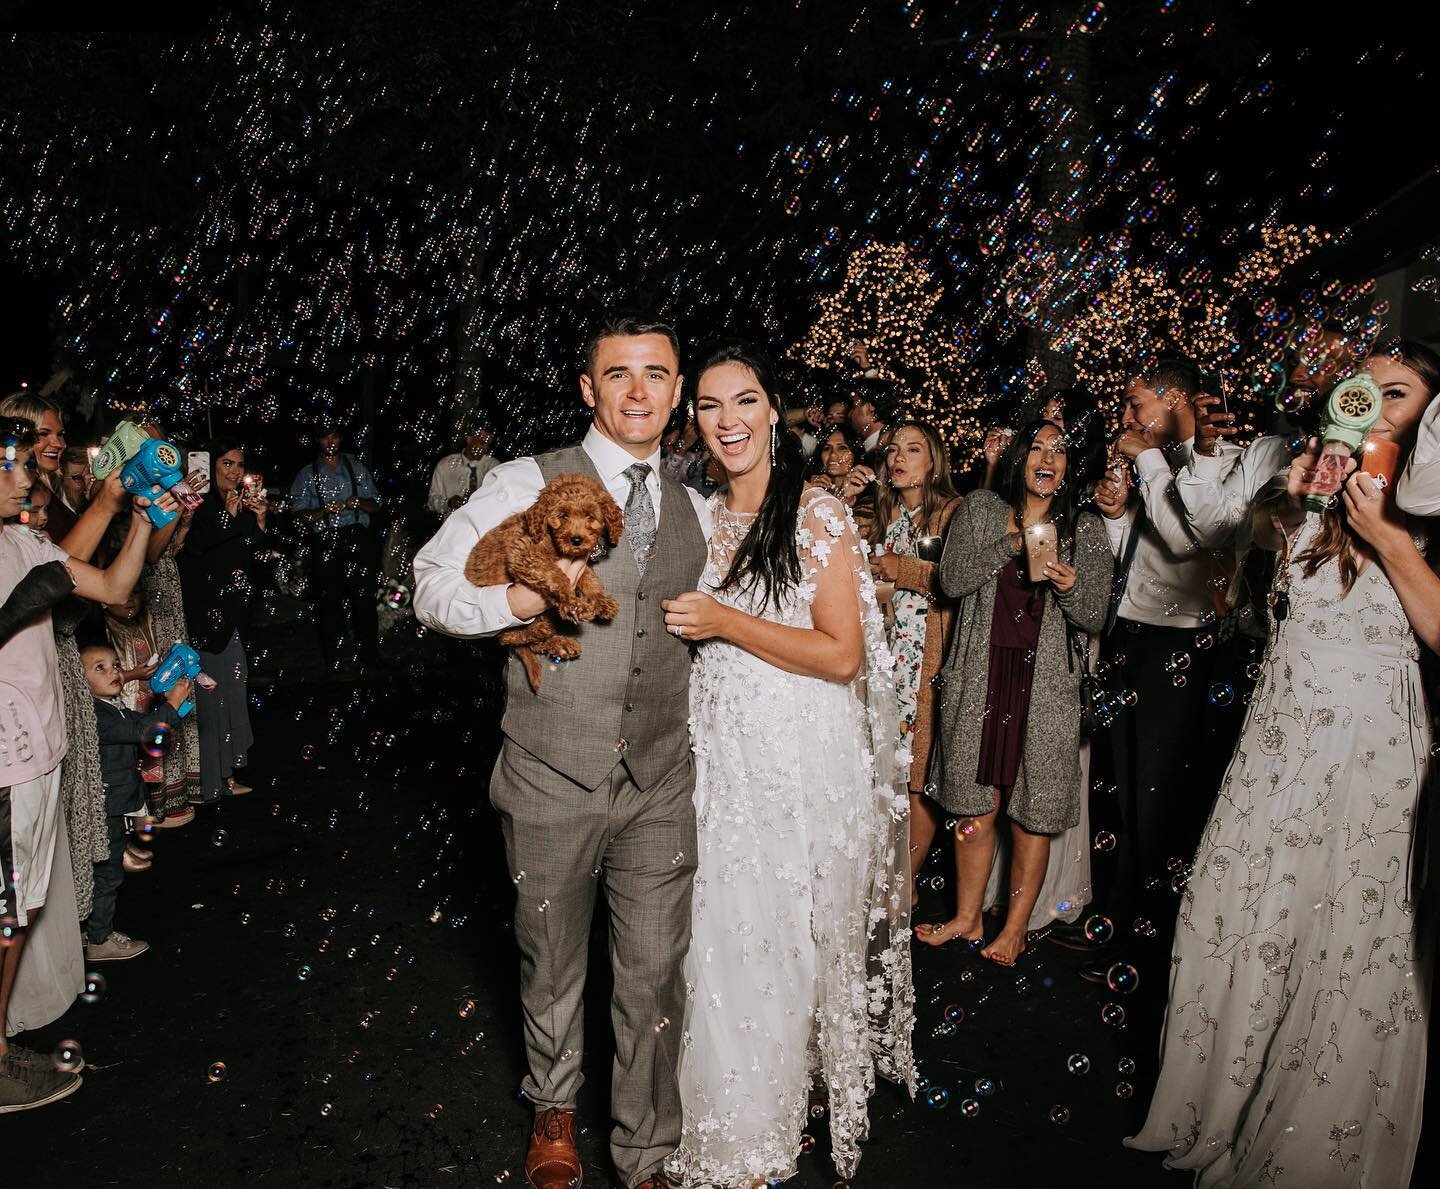 FACT: BUBBLES AND PUPPIES make wedding send offs EPIC!!